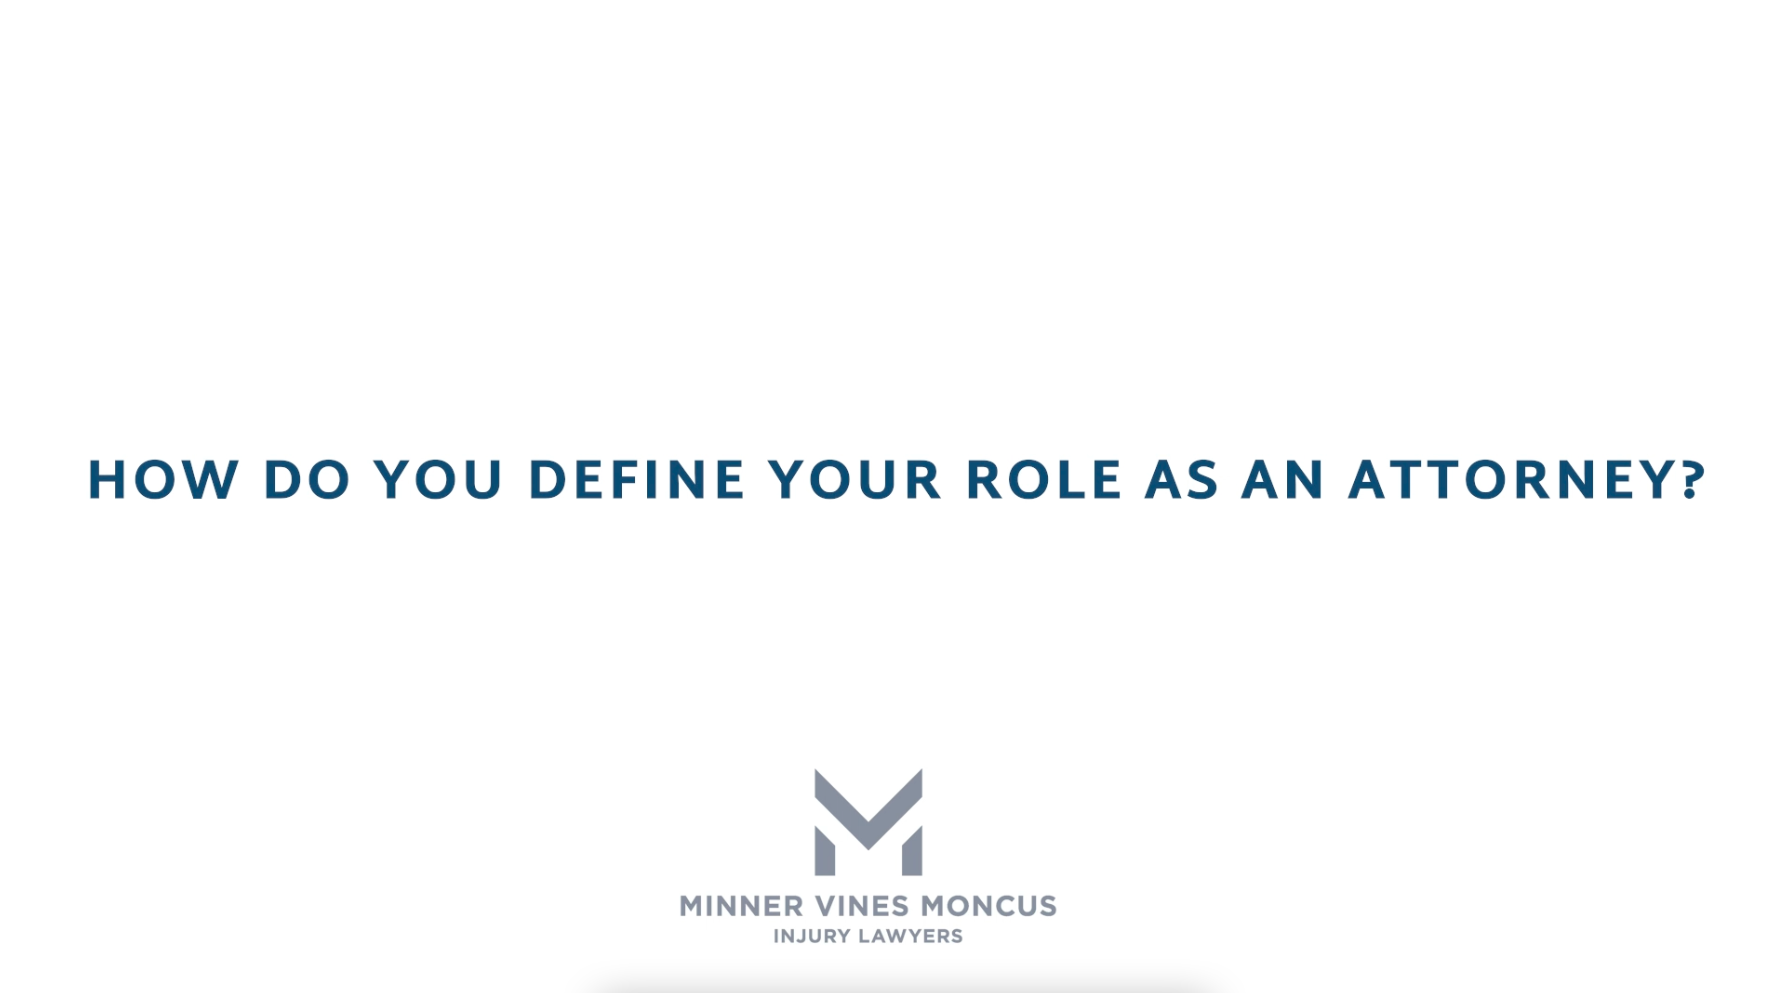 How do you define your role as an attorney?